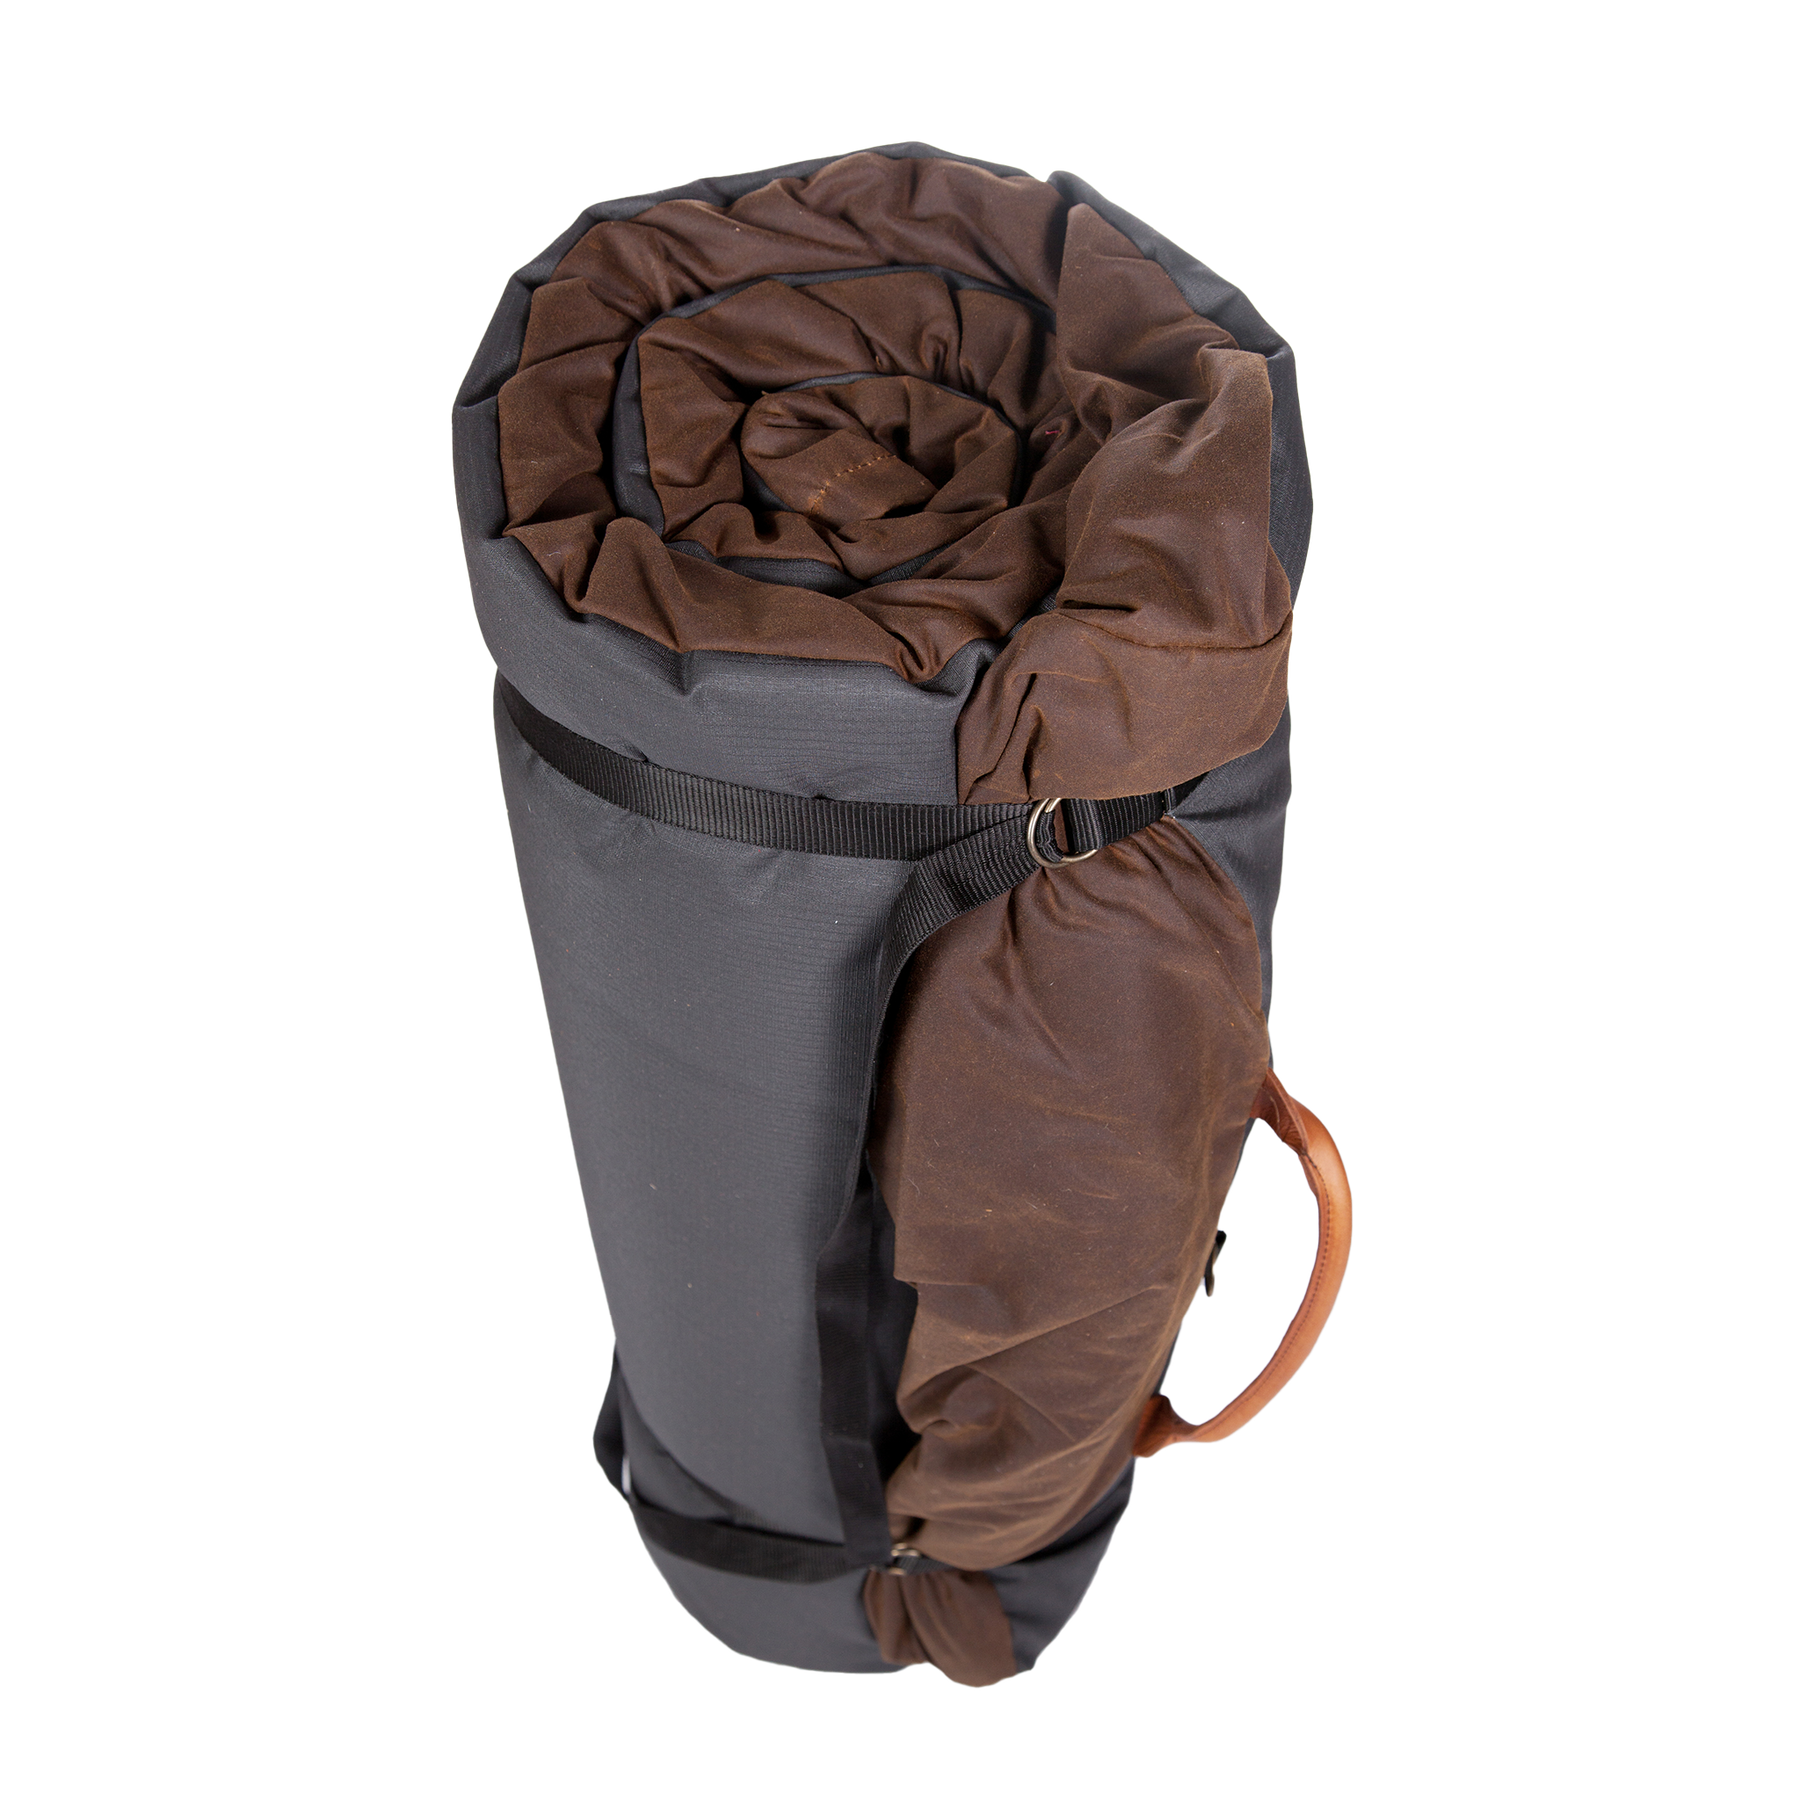 Bedroll (with Covered Mattress & Sand Canvas Bag)   Melvill & Moon USA- Overland Kitted